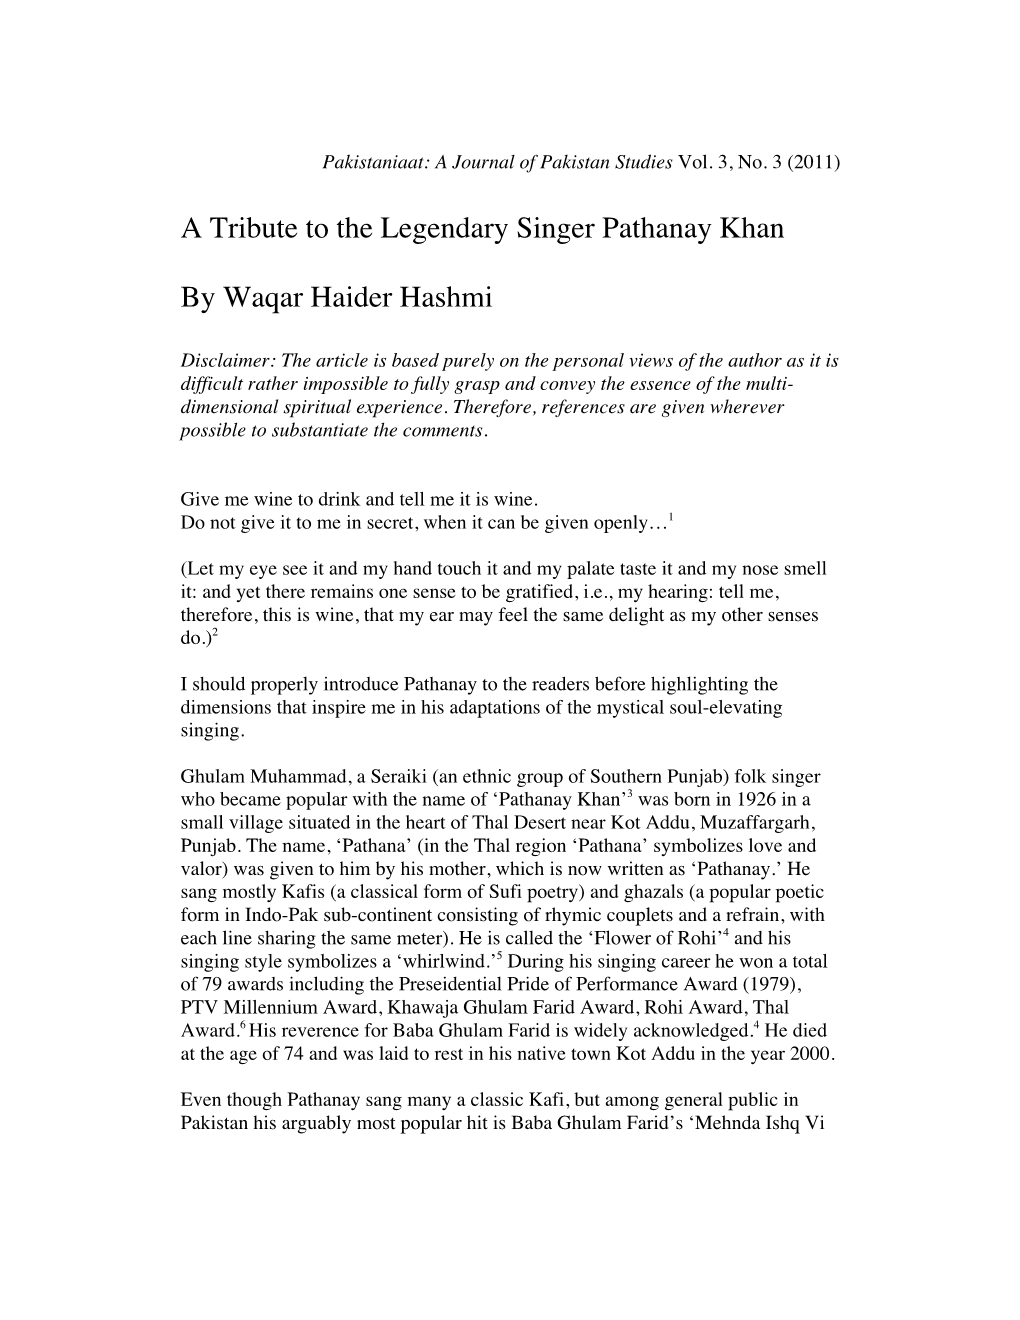 A Tribute to the Legendary Singer Pathanay Khan by Waqar Haider